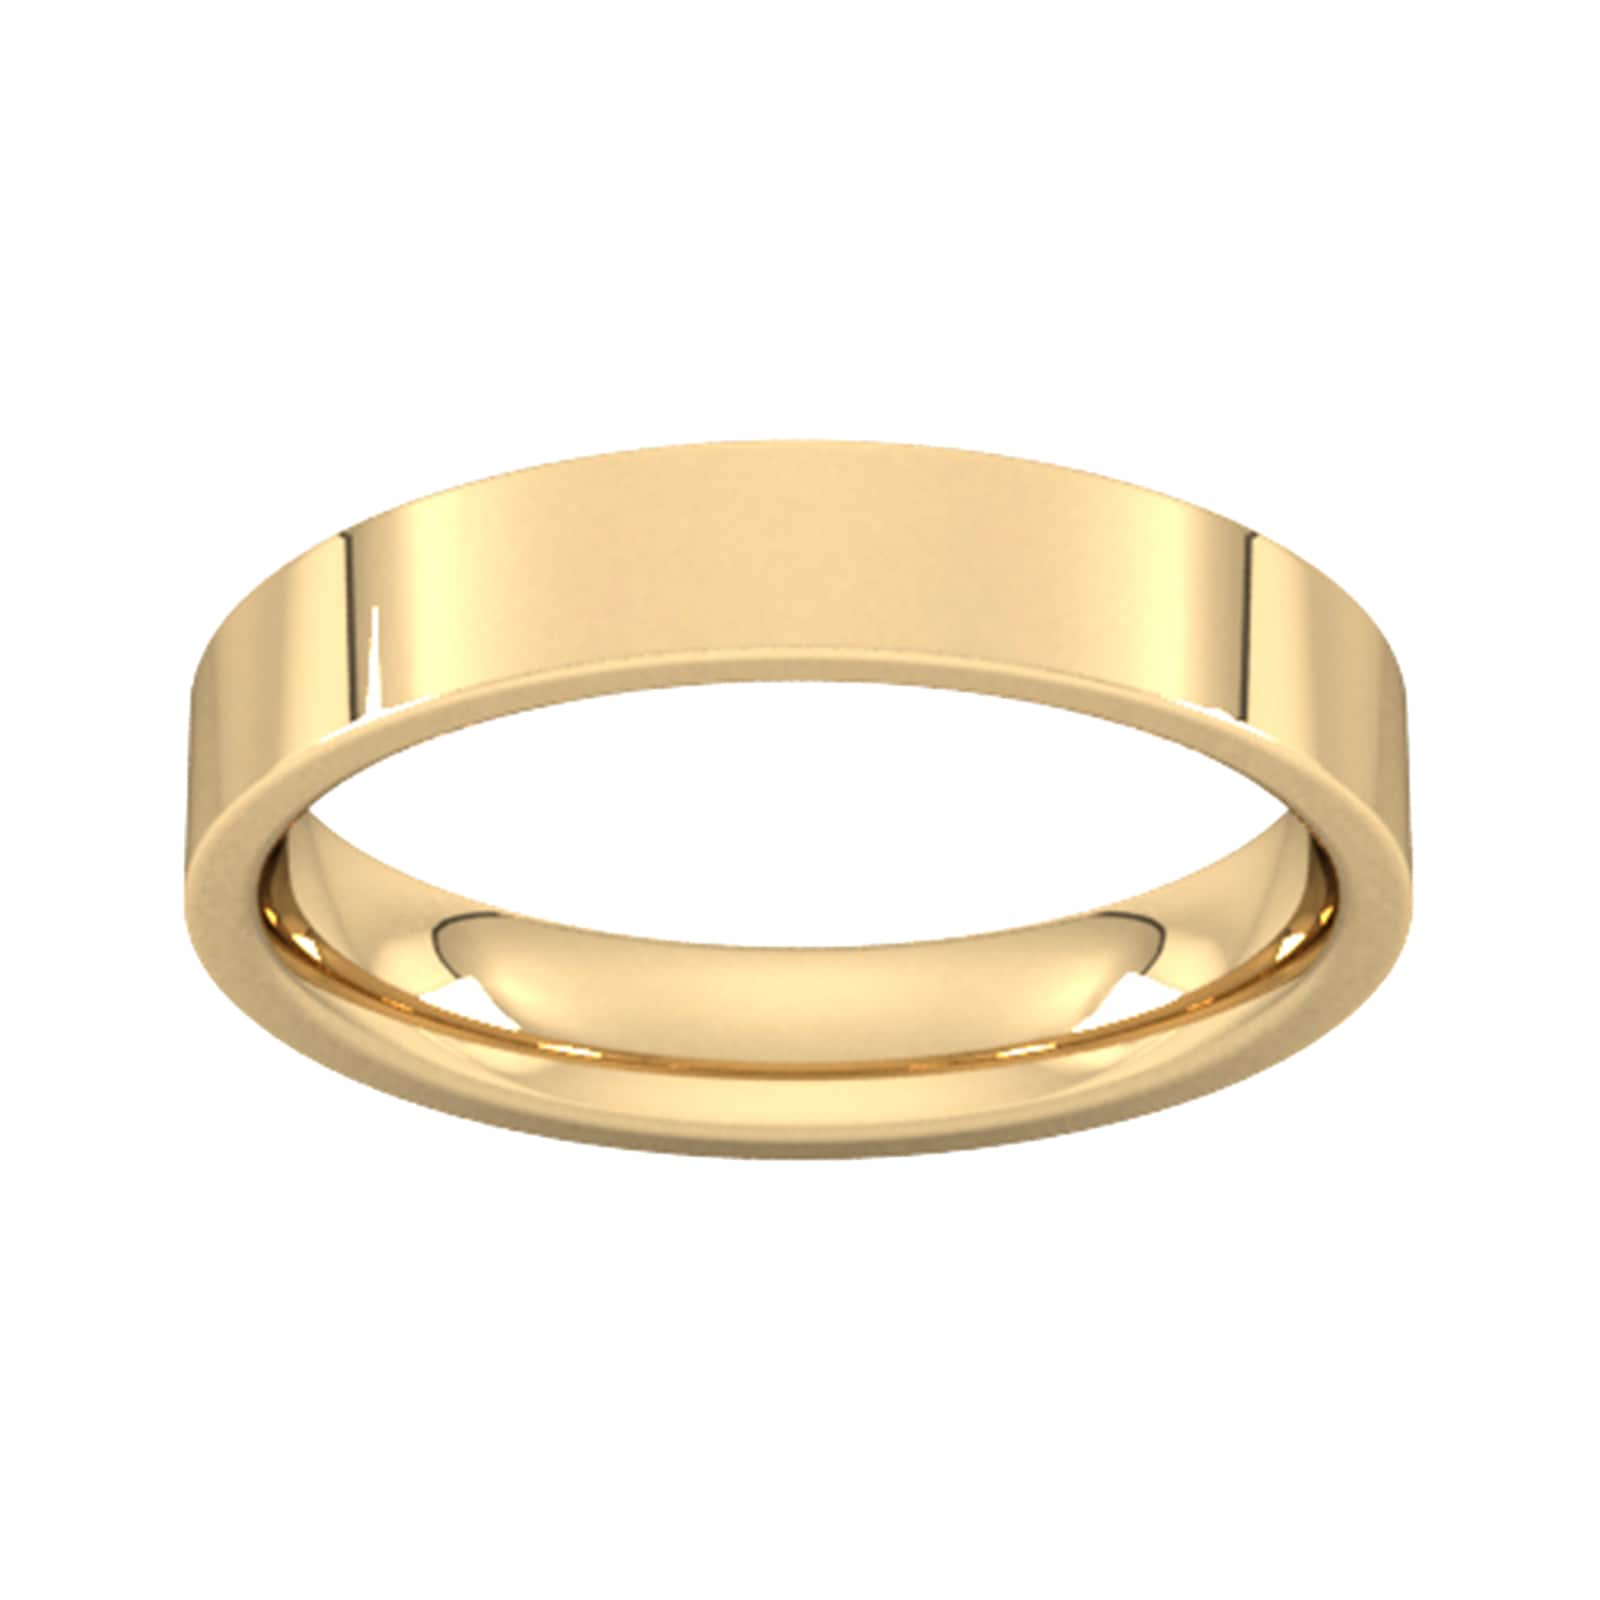 4mm Flat Court Heavy Wedding Ring In 9 Carat Yellow Gold - Ring Size O